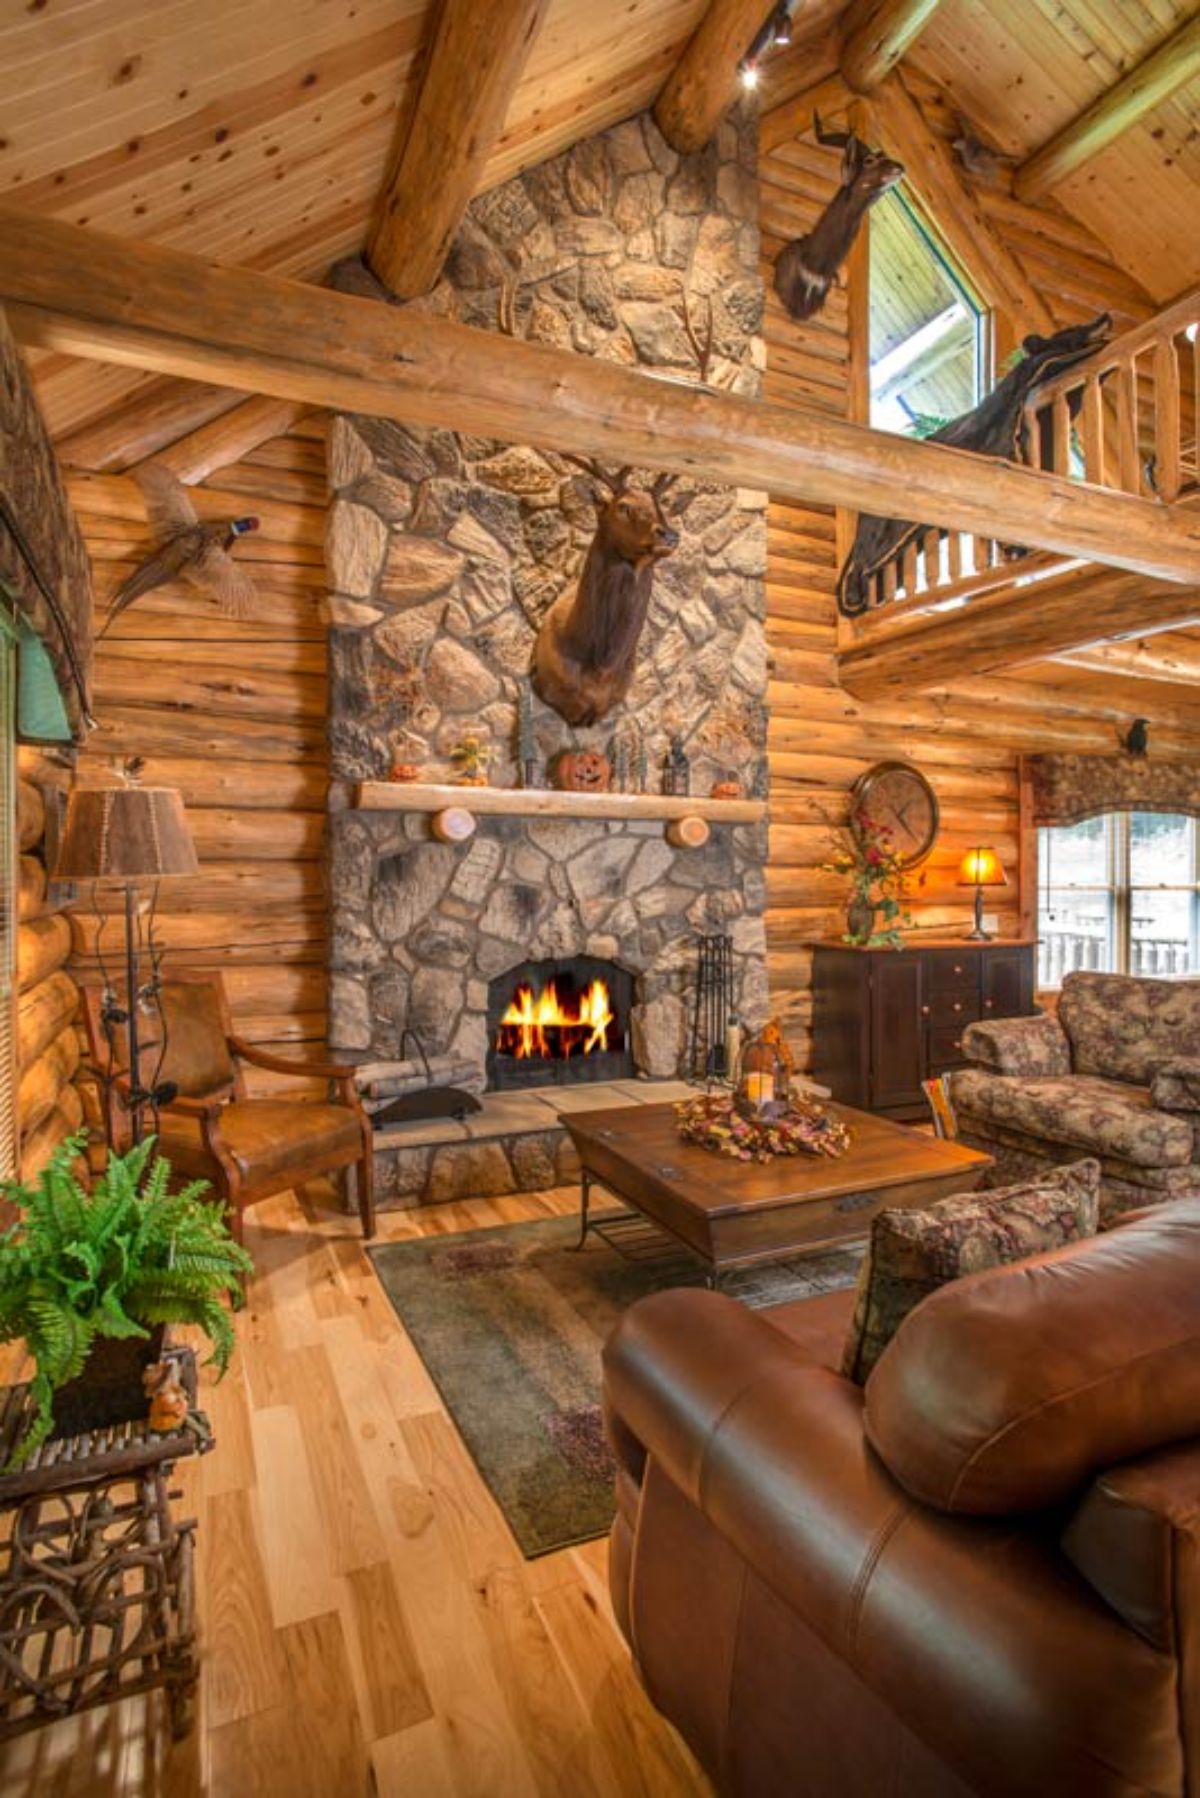 stone fireplace in log cabin with brown leather sofa in foreground